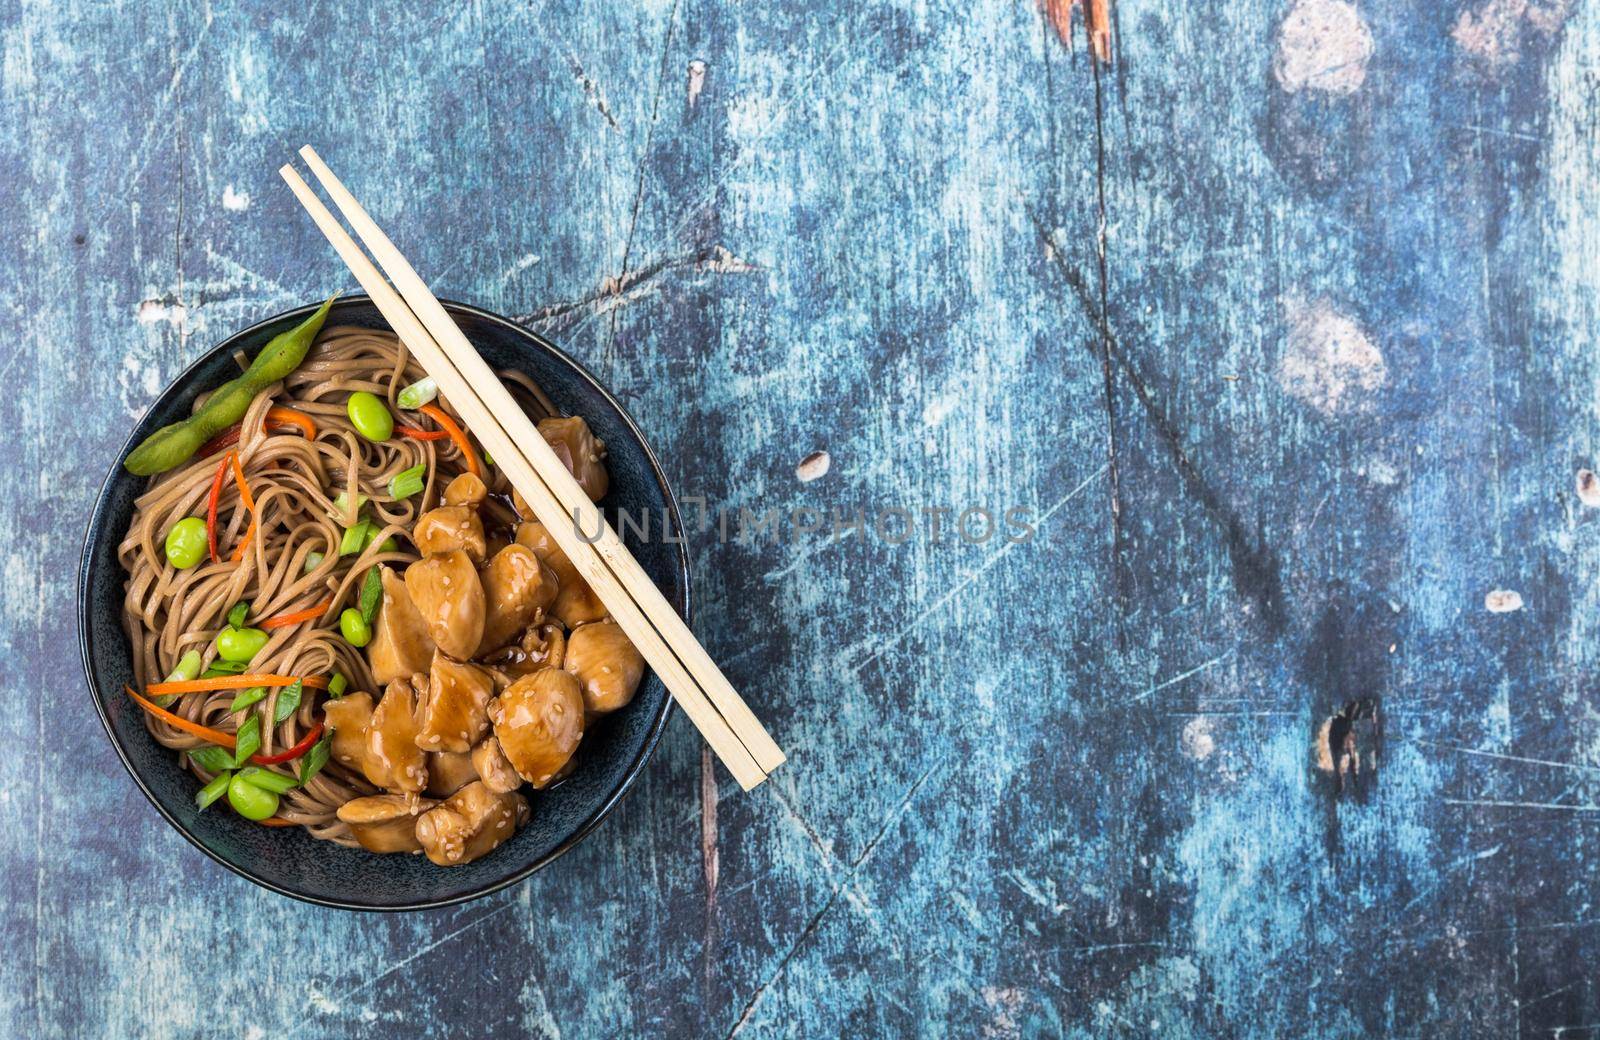 Asian noodles with chicken, vegetables, bowl, rustic wooden blue background. Space for text. Top view. Soba noodles, teriyaki chicken, edamame, chopsticks. Asian style dinner. Chinese/Japanese noodles